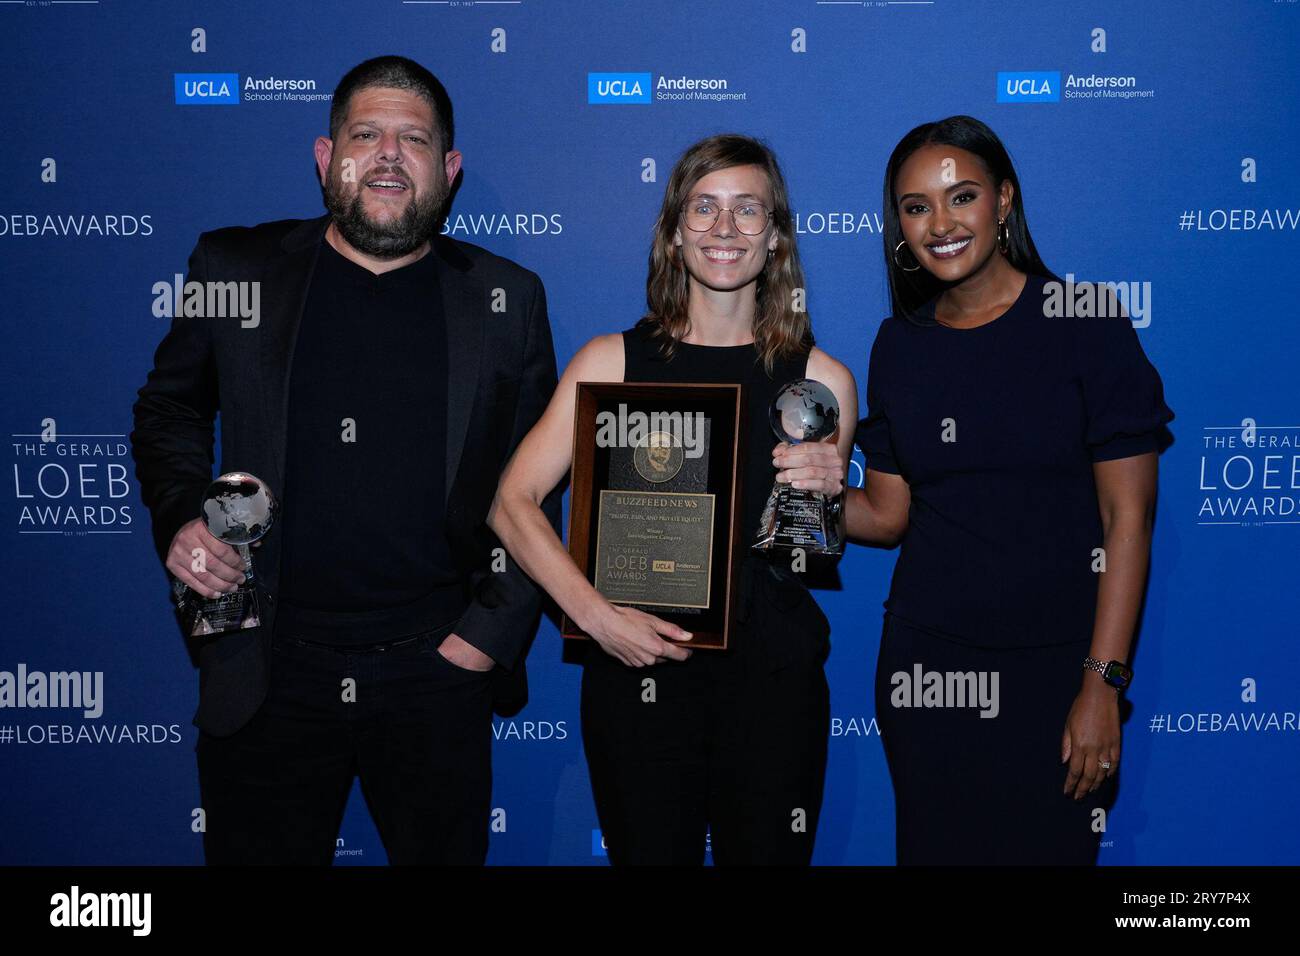 New York, United States. 28th Sep, 2023. New York, New York. Thursday September 28, 2023. Kendall Taggart, Anthony Cormier, Rahel Solomon during 2023 Gerald Loeb Awards hosted by UCLA Anderson School of Business, held at Capitale in New York City, Thursday, September 28, 2023. Photo Credit: Jennifer Graylock/Alamy Live News Stock Photo